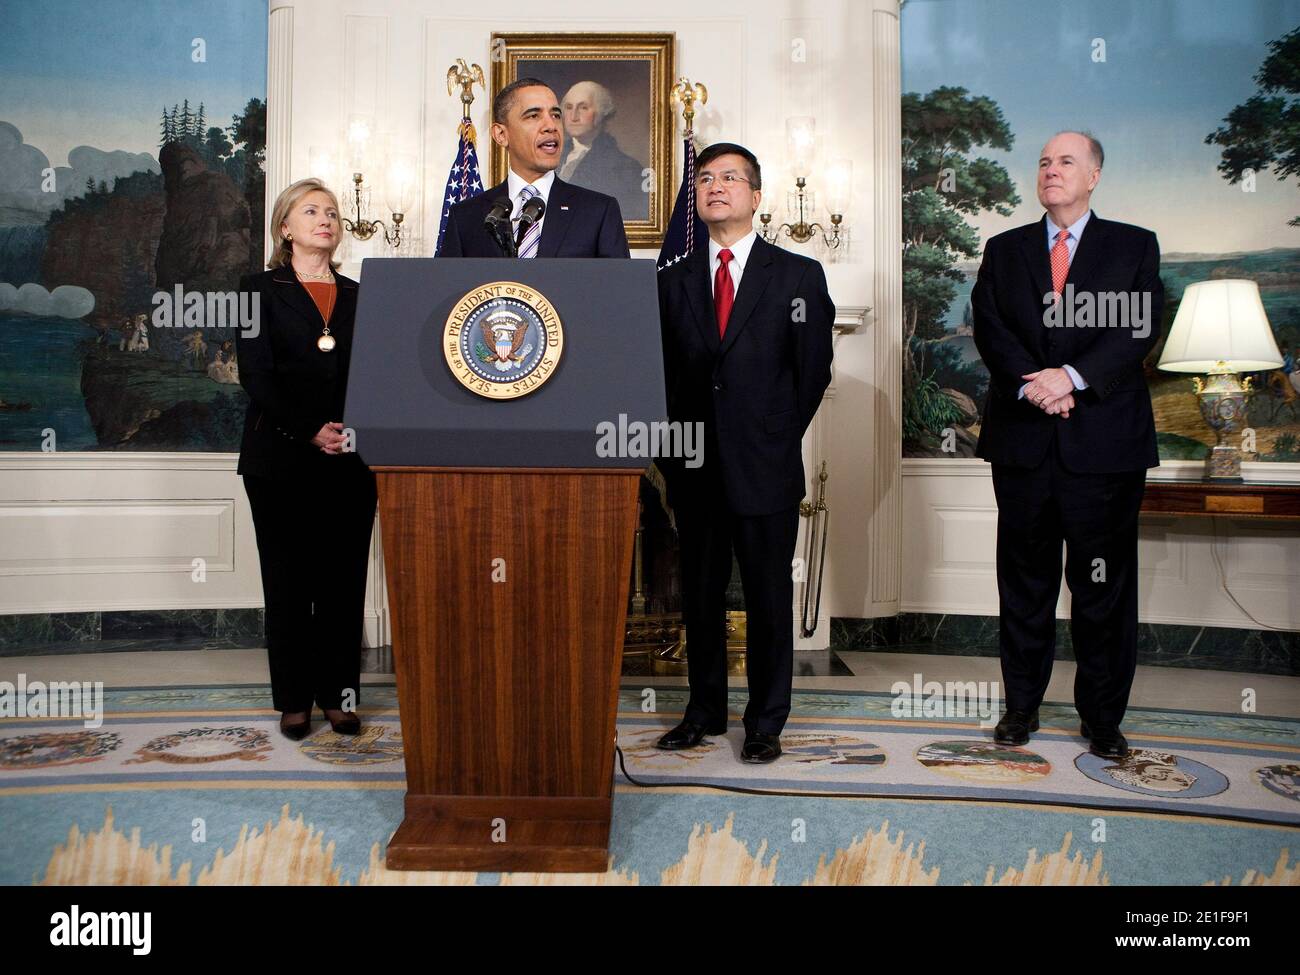 U.S. President Barack Obama, announces the nomination of Gary Locke, secretary of commerce, to be the next U.S. ambassador to China, at the White House in Washington, D.C., U.S., on March 9, 2011. Listening are Hillary Clinton, U.S. secretary of state, left, and Tim Donilon, national security advisor, right. Photo by Joshua Roberts/Bloomberg News/ABACAUSA.COM Stock Photo